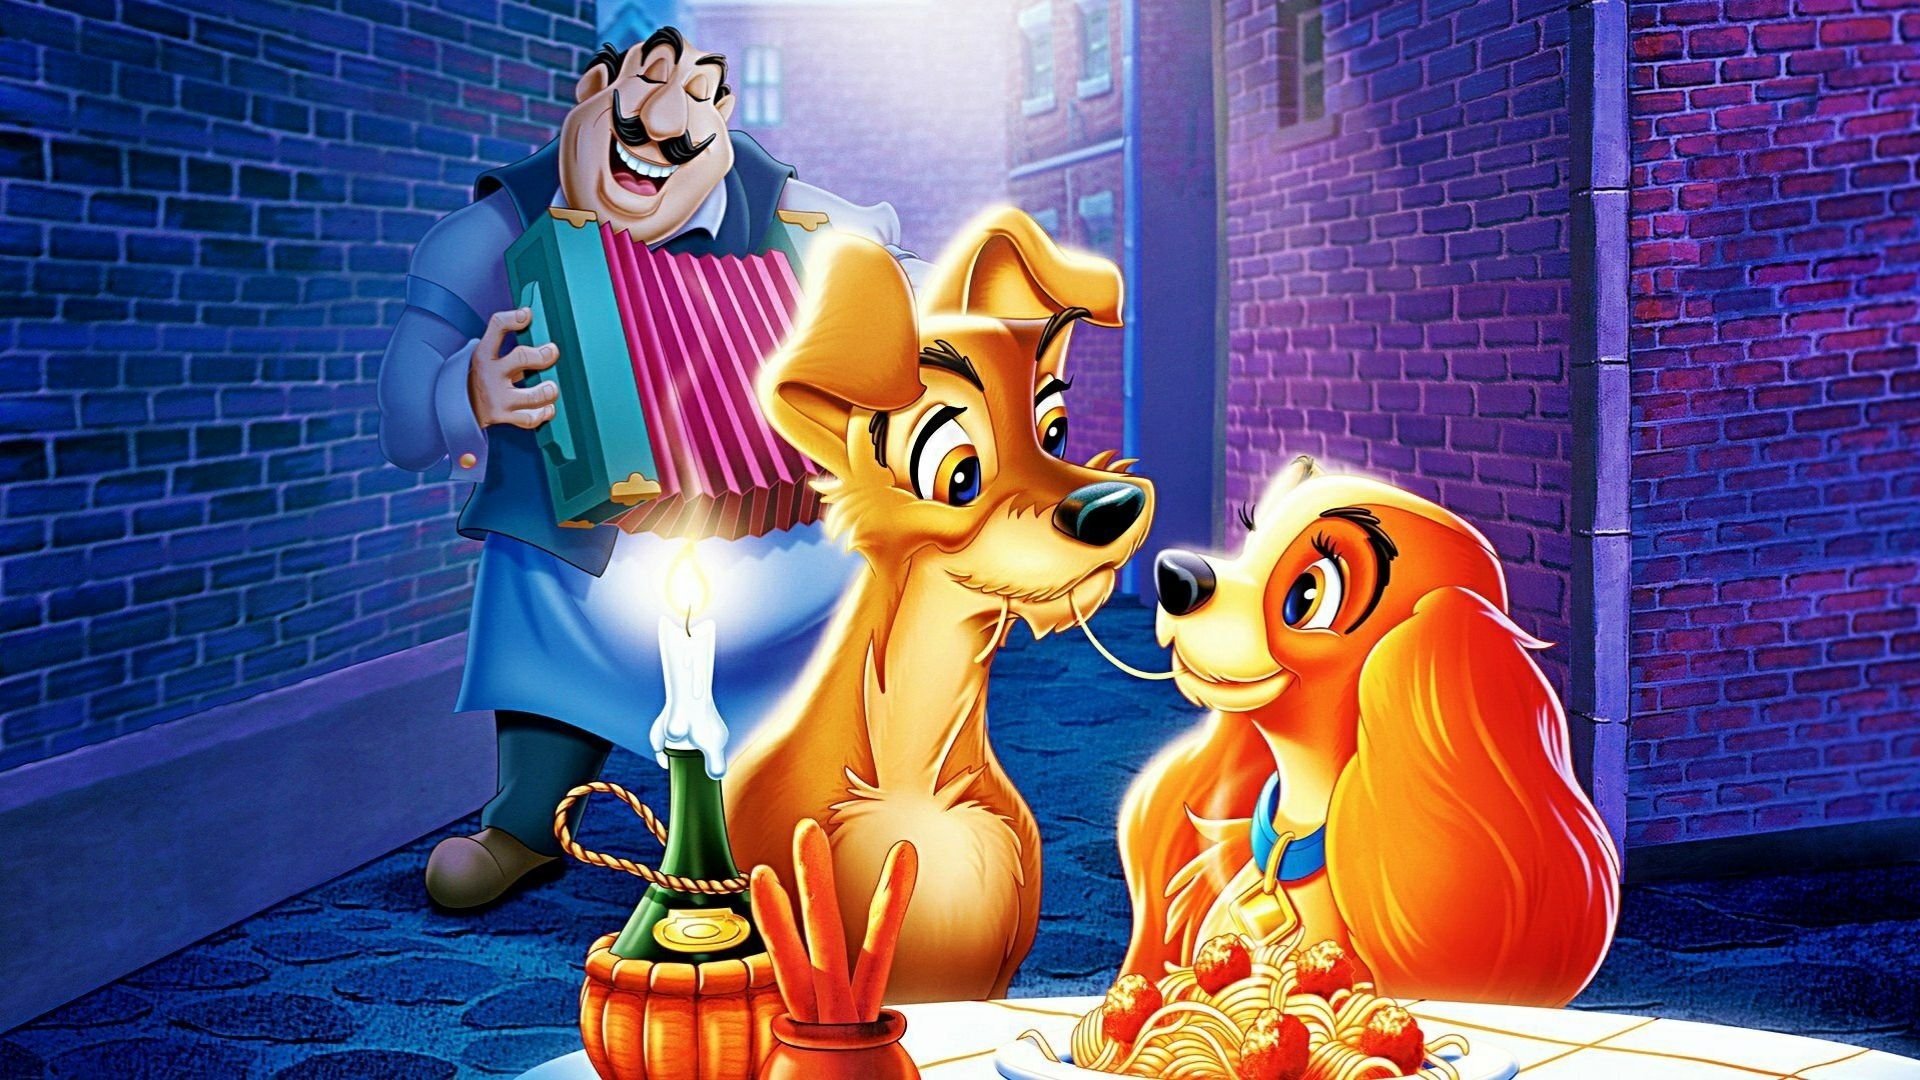 Lady and the Tramp, Vintage wallpaper, Charming animation, Disney classic, 1920x1080 Full HD Desktop